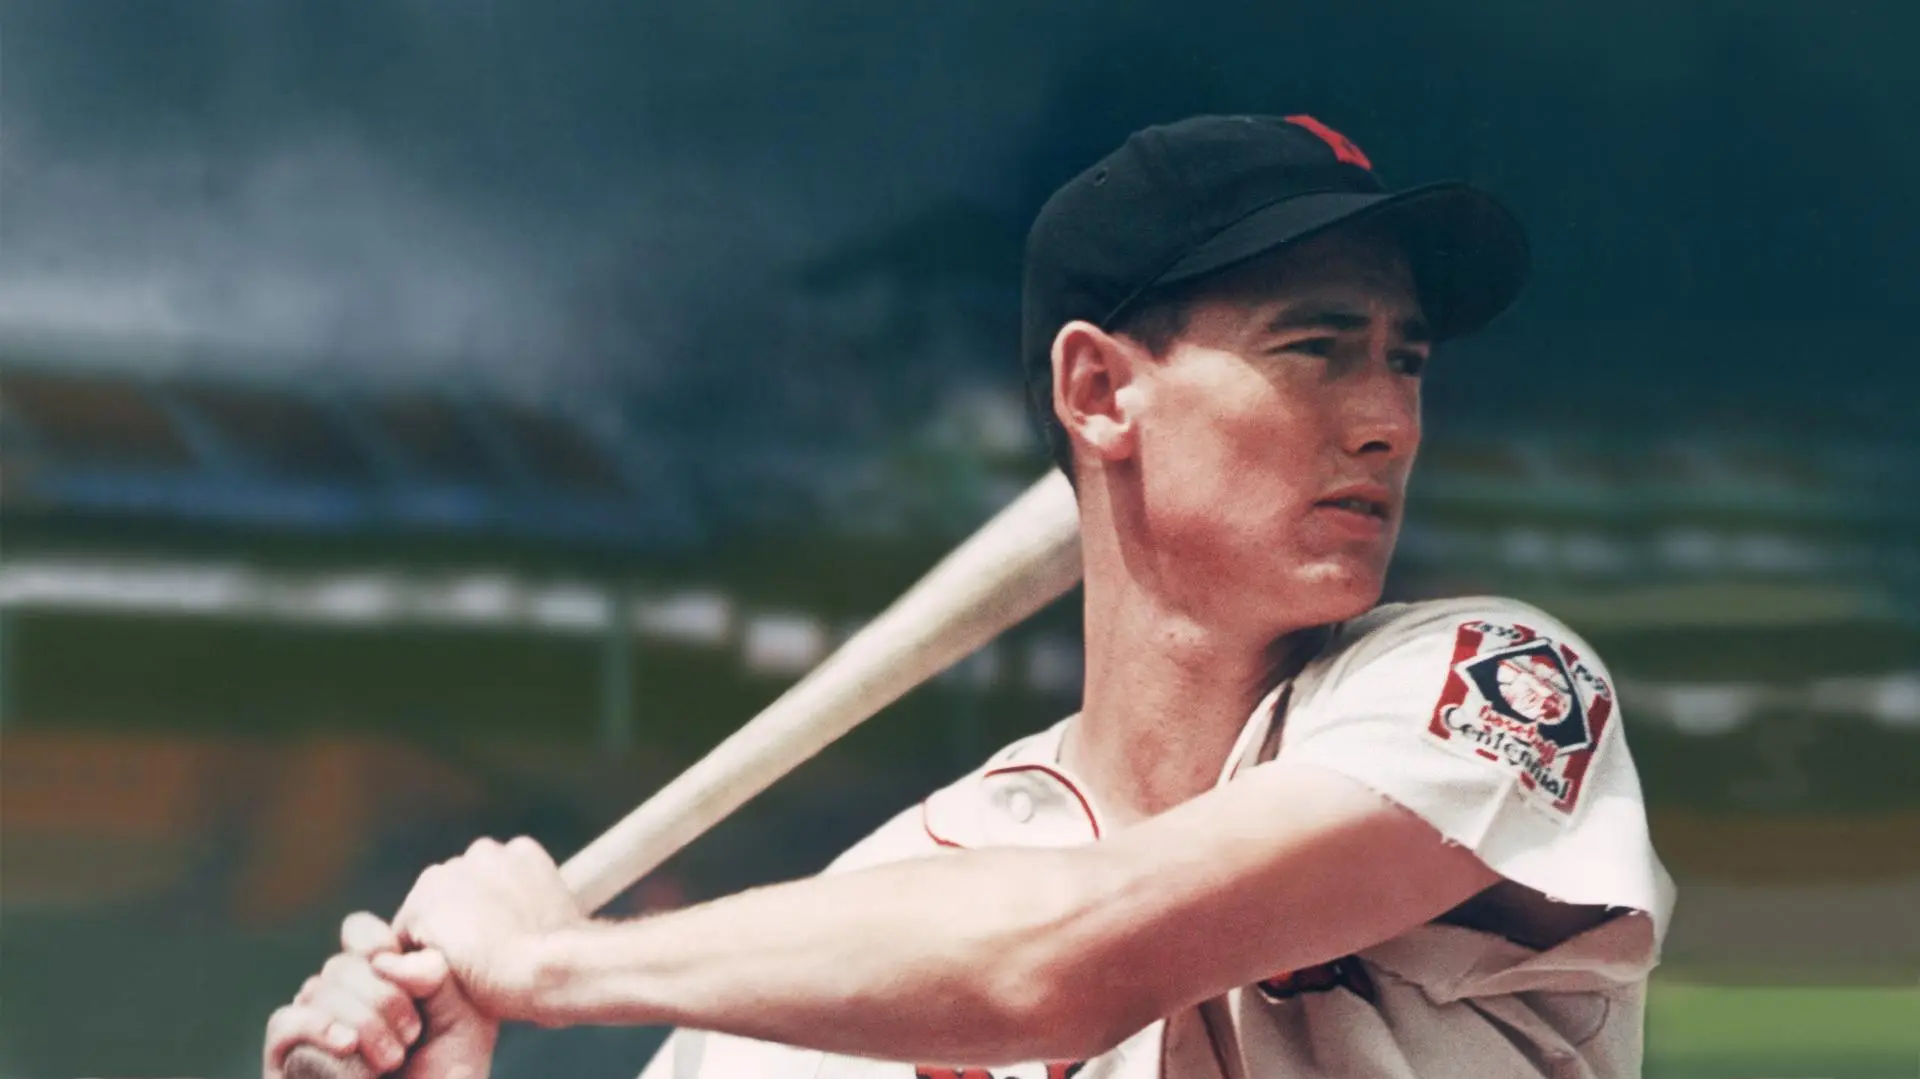 Ted Williams: There Goes the Greatest Hitter That Ever Lived_peliplat